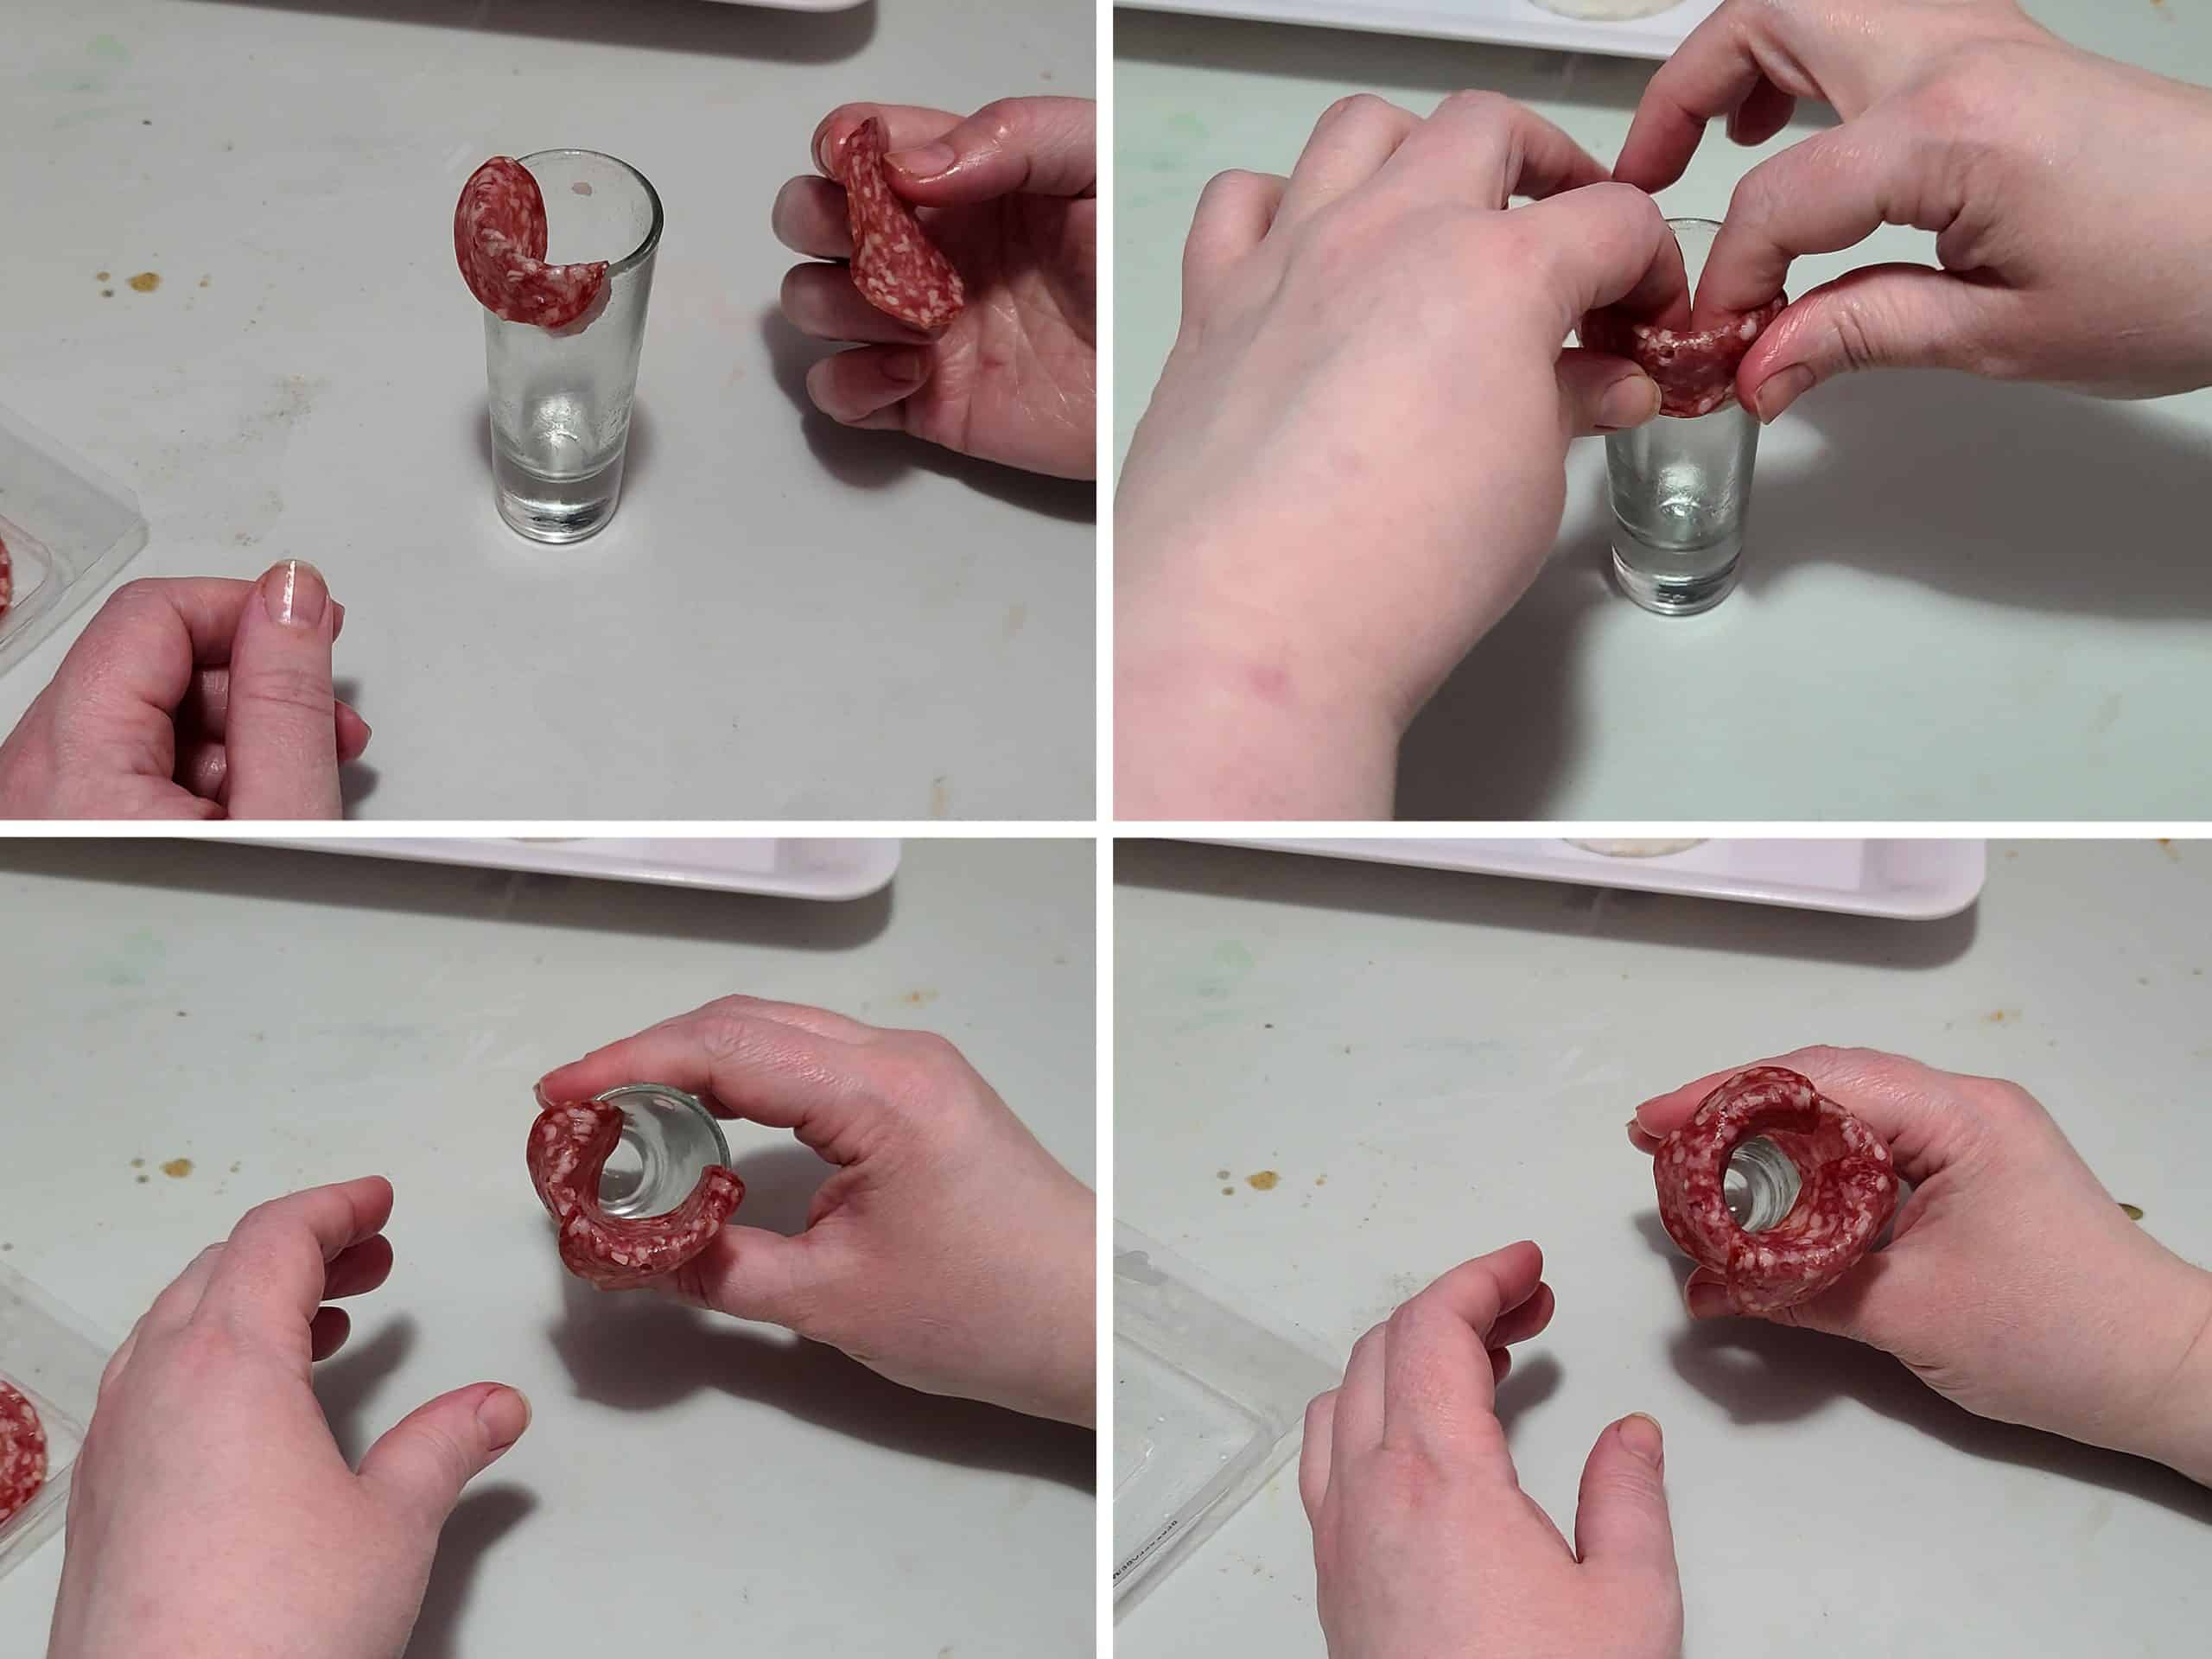 4 part image showing a small salami rose being made on a shot glass.